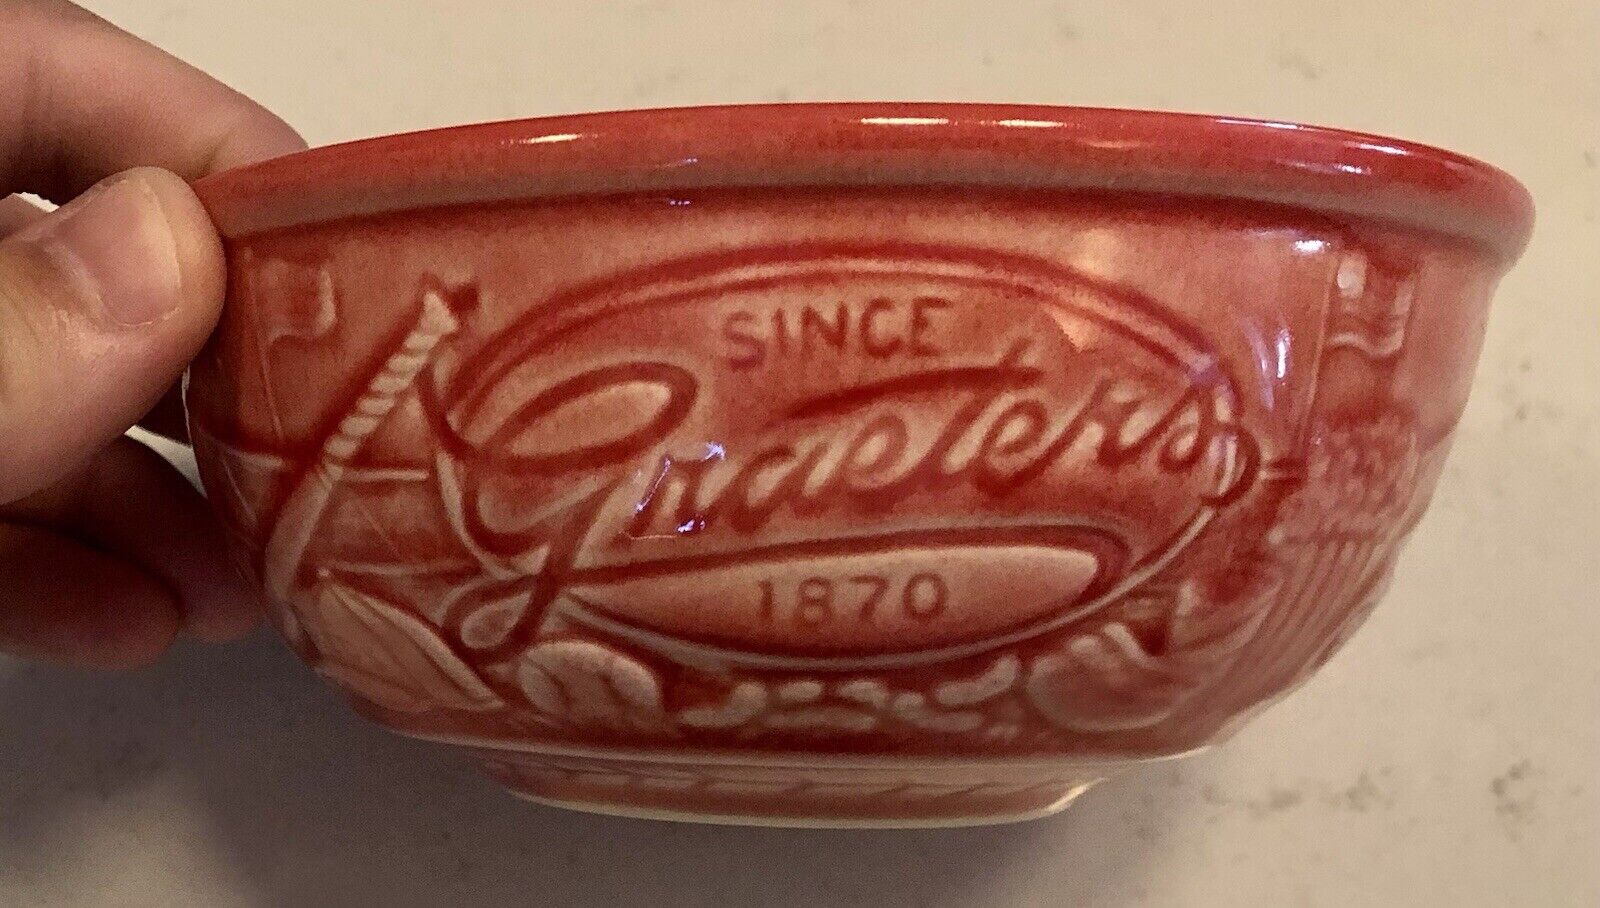 Rookwood Limited Edition Graeter’s Cincinnati Reds Ice Cream Bowl - New In Box